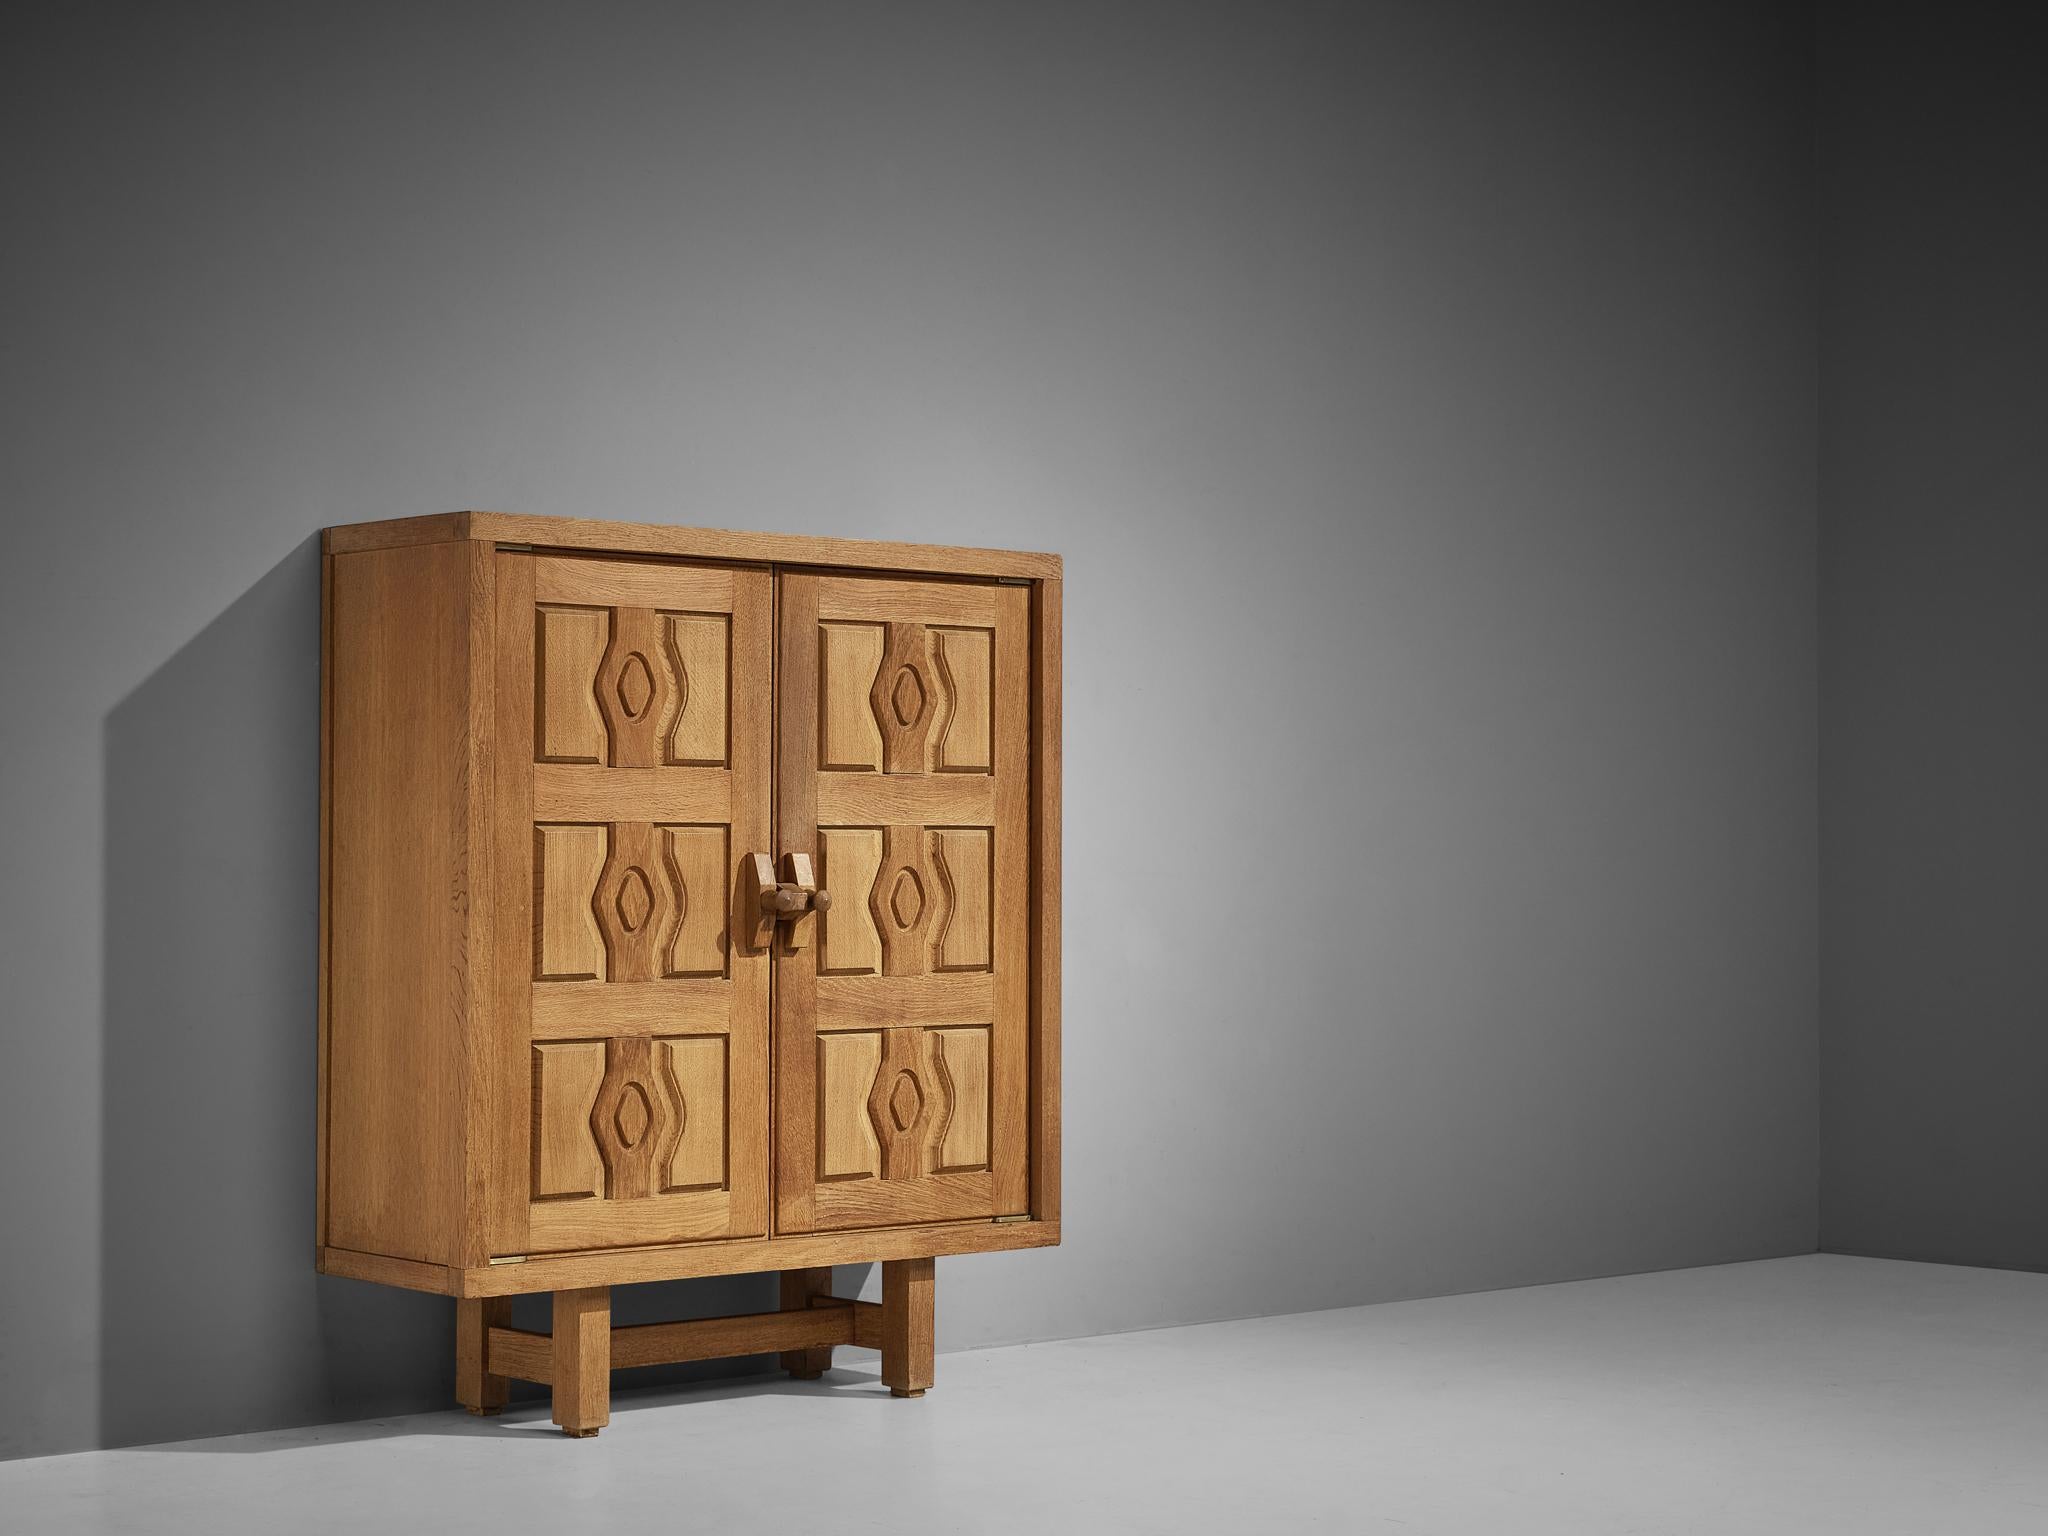 Guillerme and Chambron, high board, oak, France, 1960s.

This cabinet is designed by Guillerme and Chambron and features geometric engravings in the doors that offers plenty of storage behind them. The highboard contains characteristic handles for